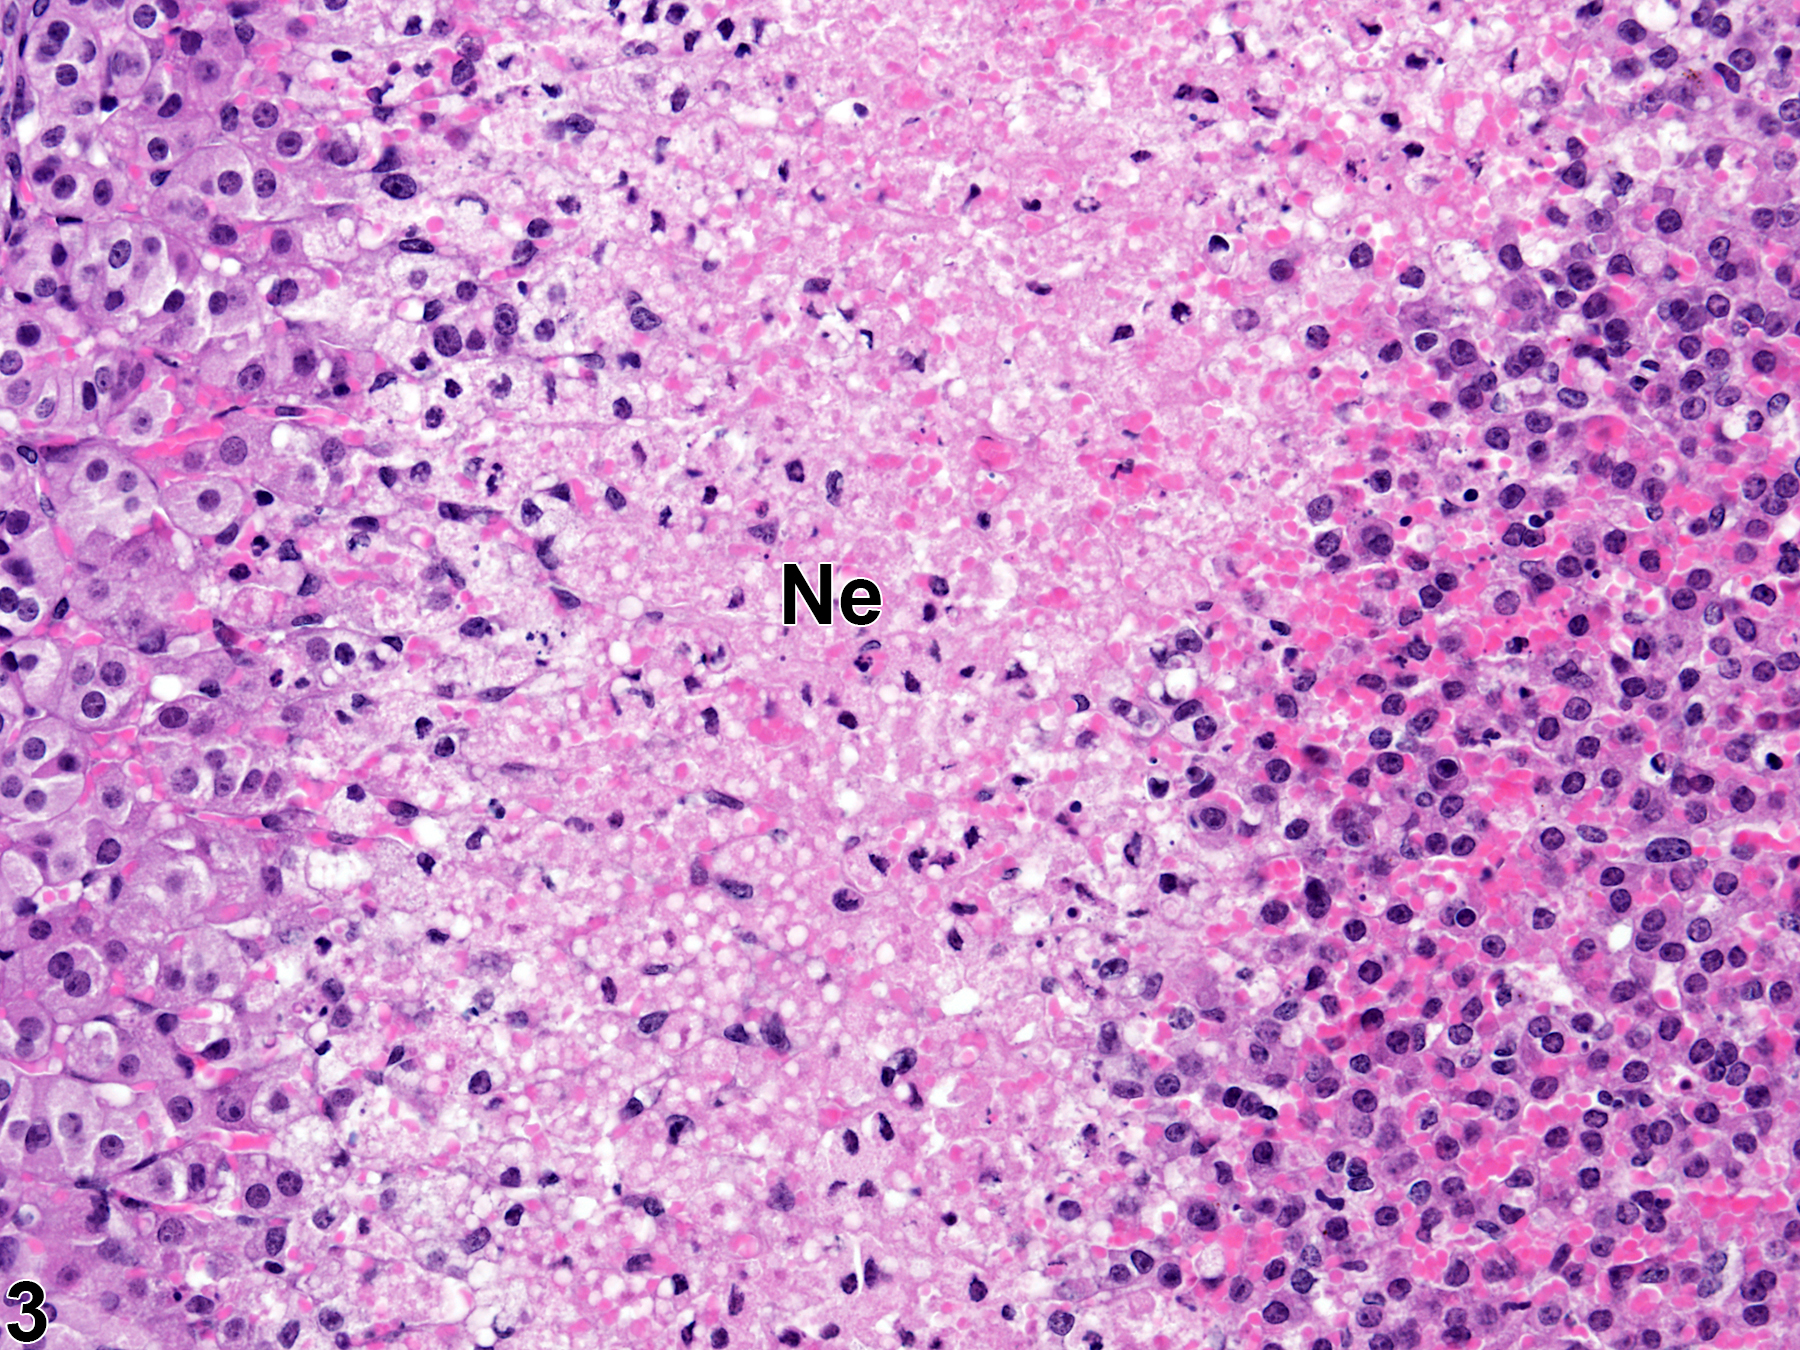 Image of necrosis in the adrenal gland cortex from a female B6C3F1/N mouse in a subchronic study